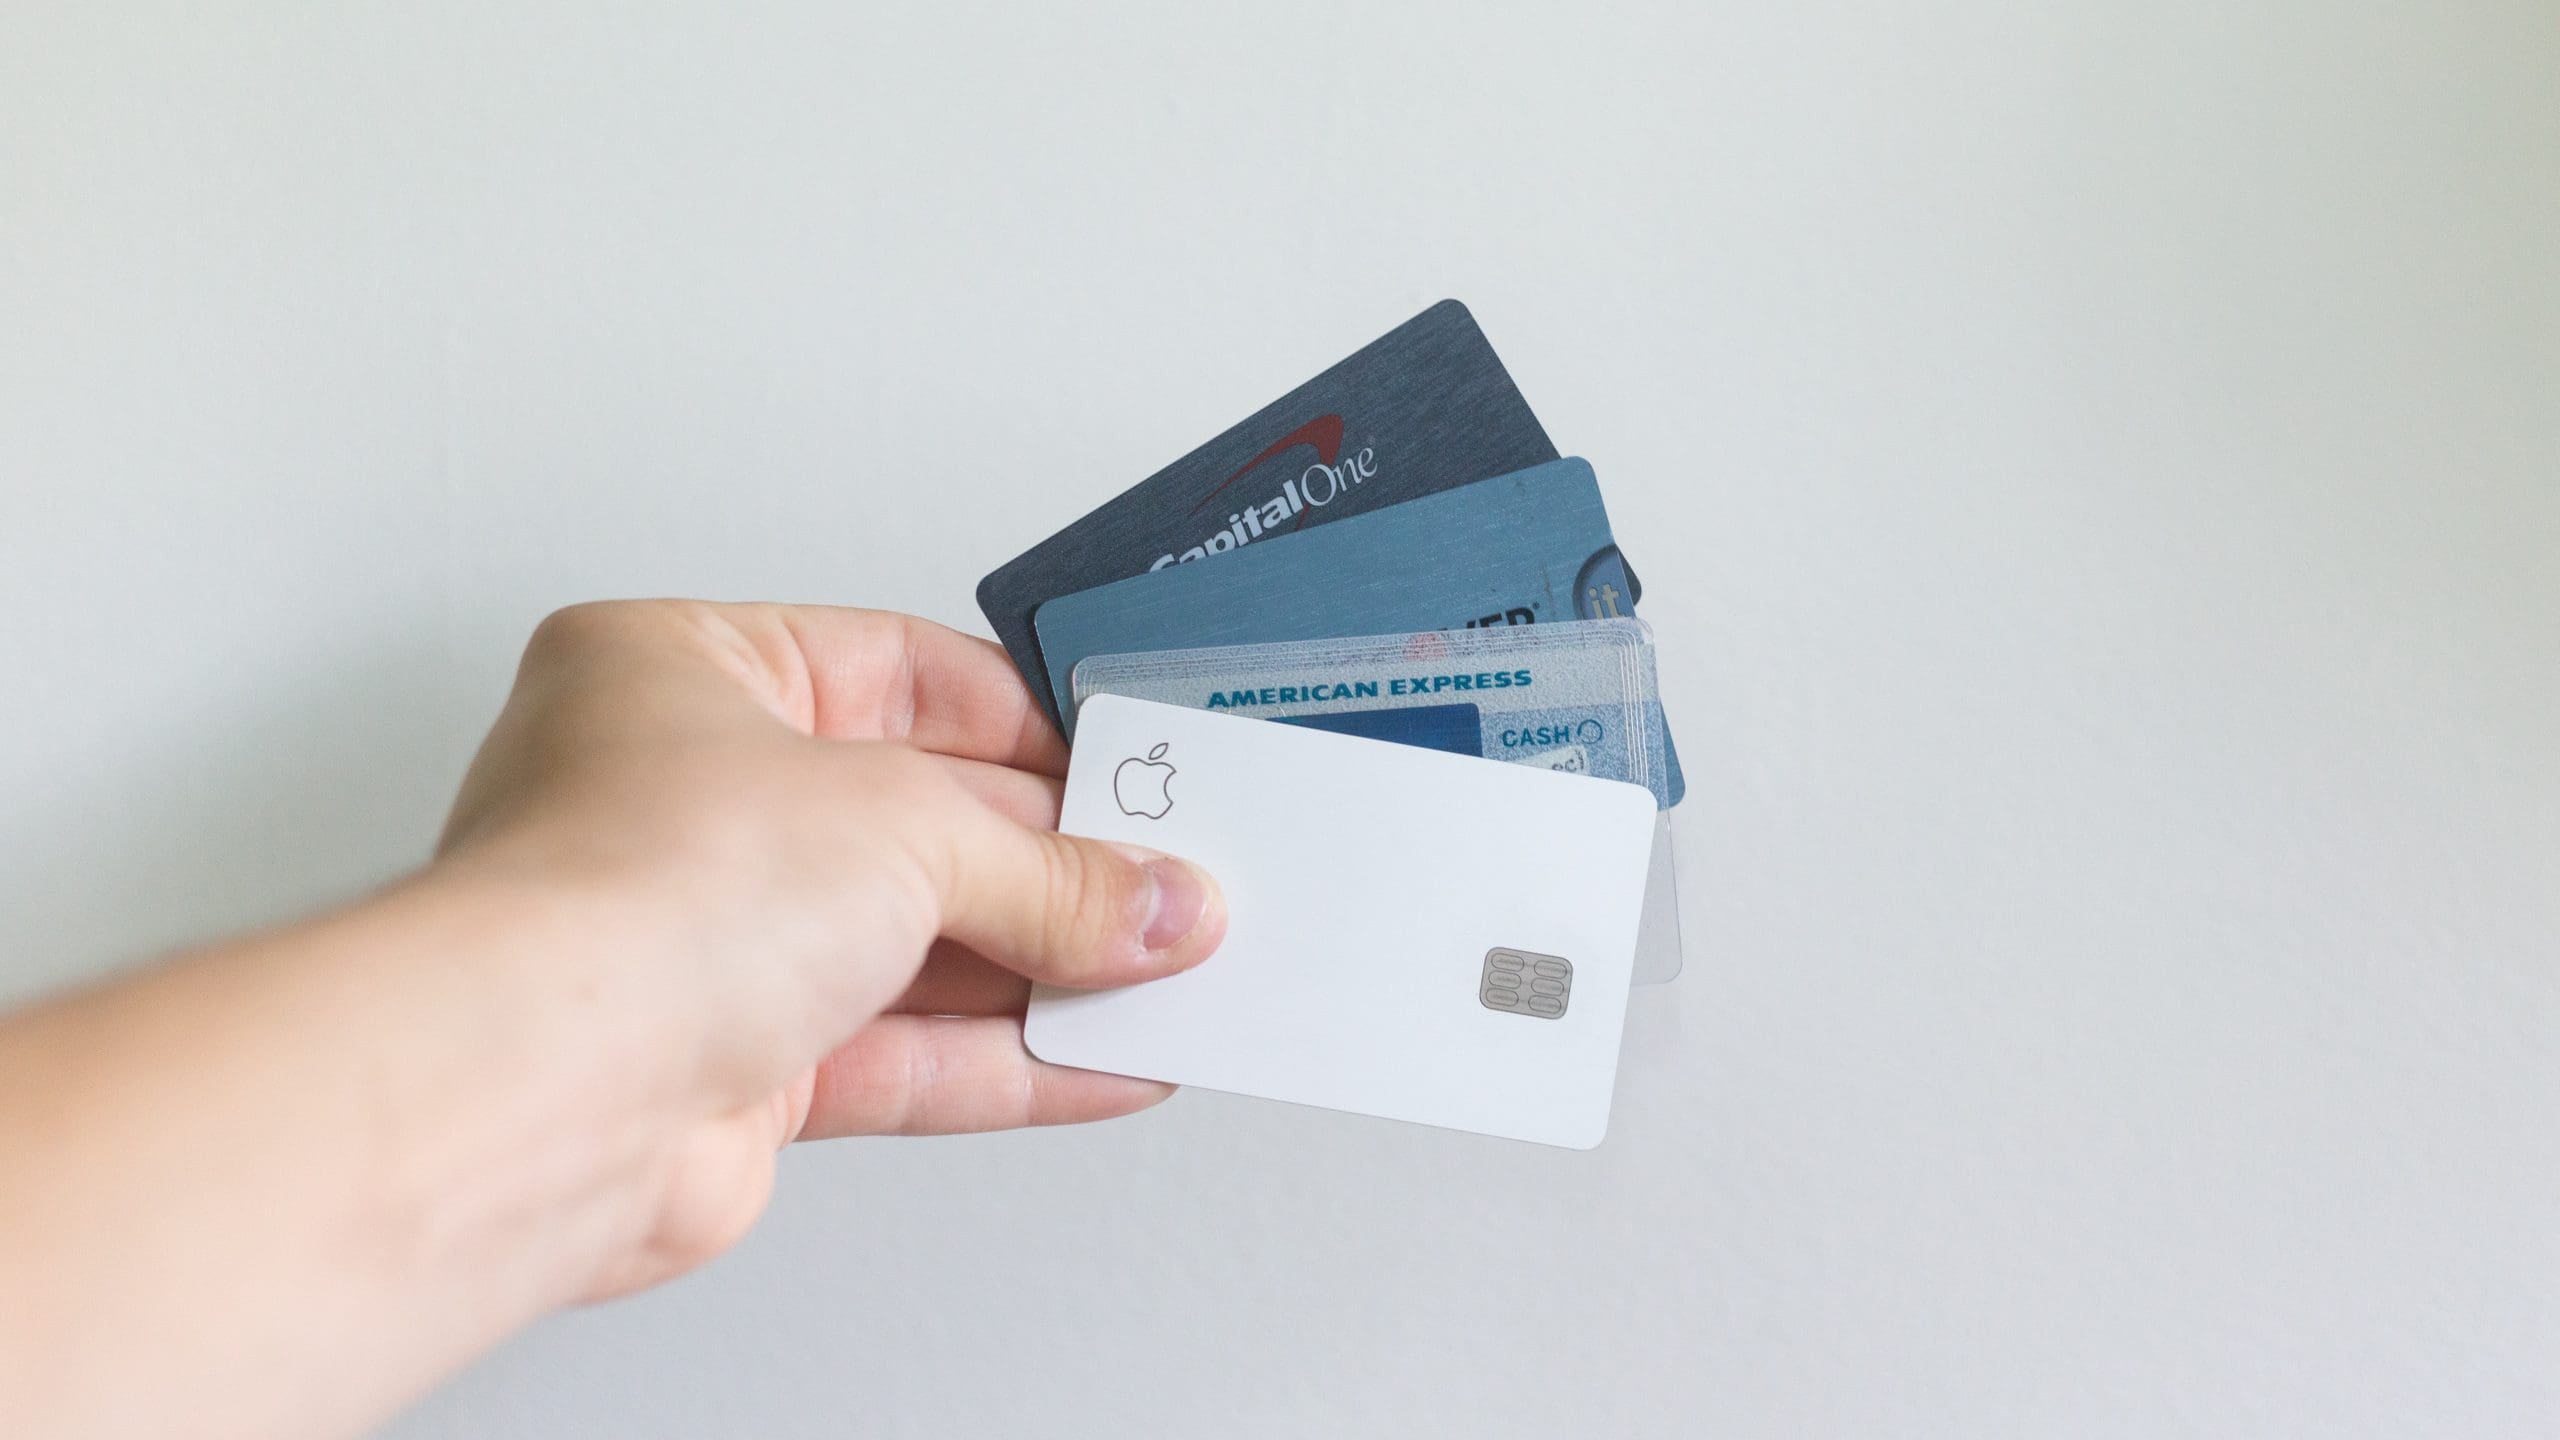 Image shows a hand holding multilpe credit cards to ask the question Should authors use Square?